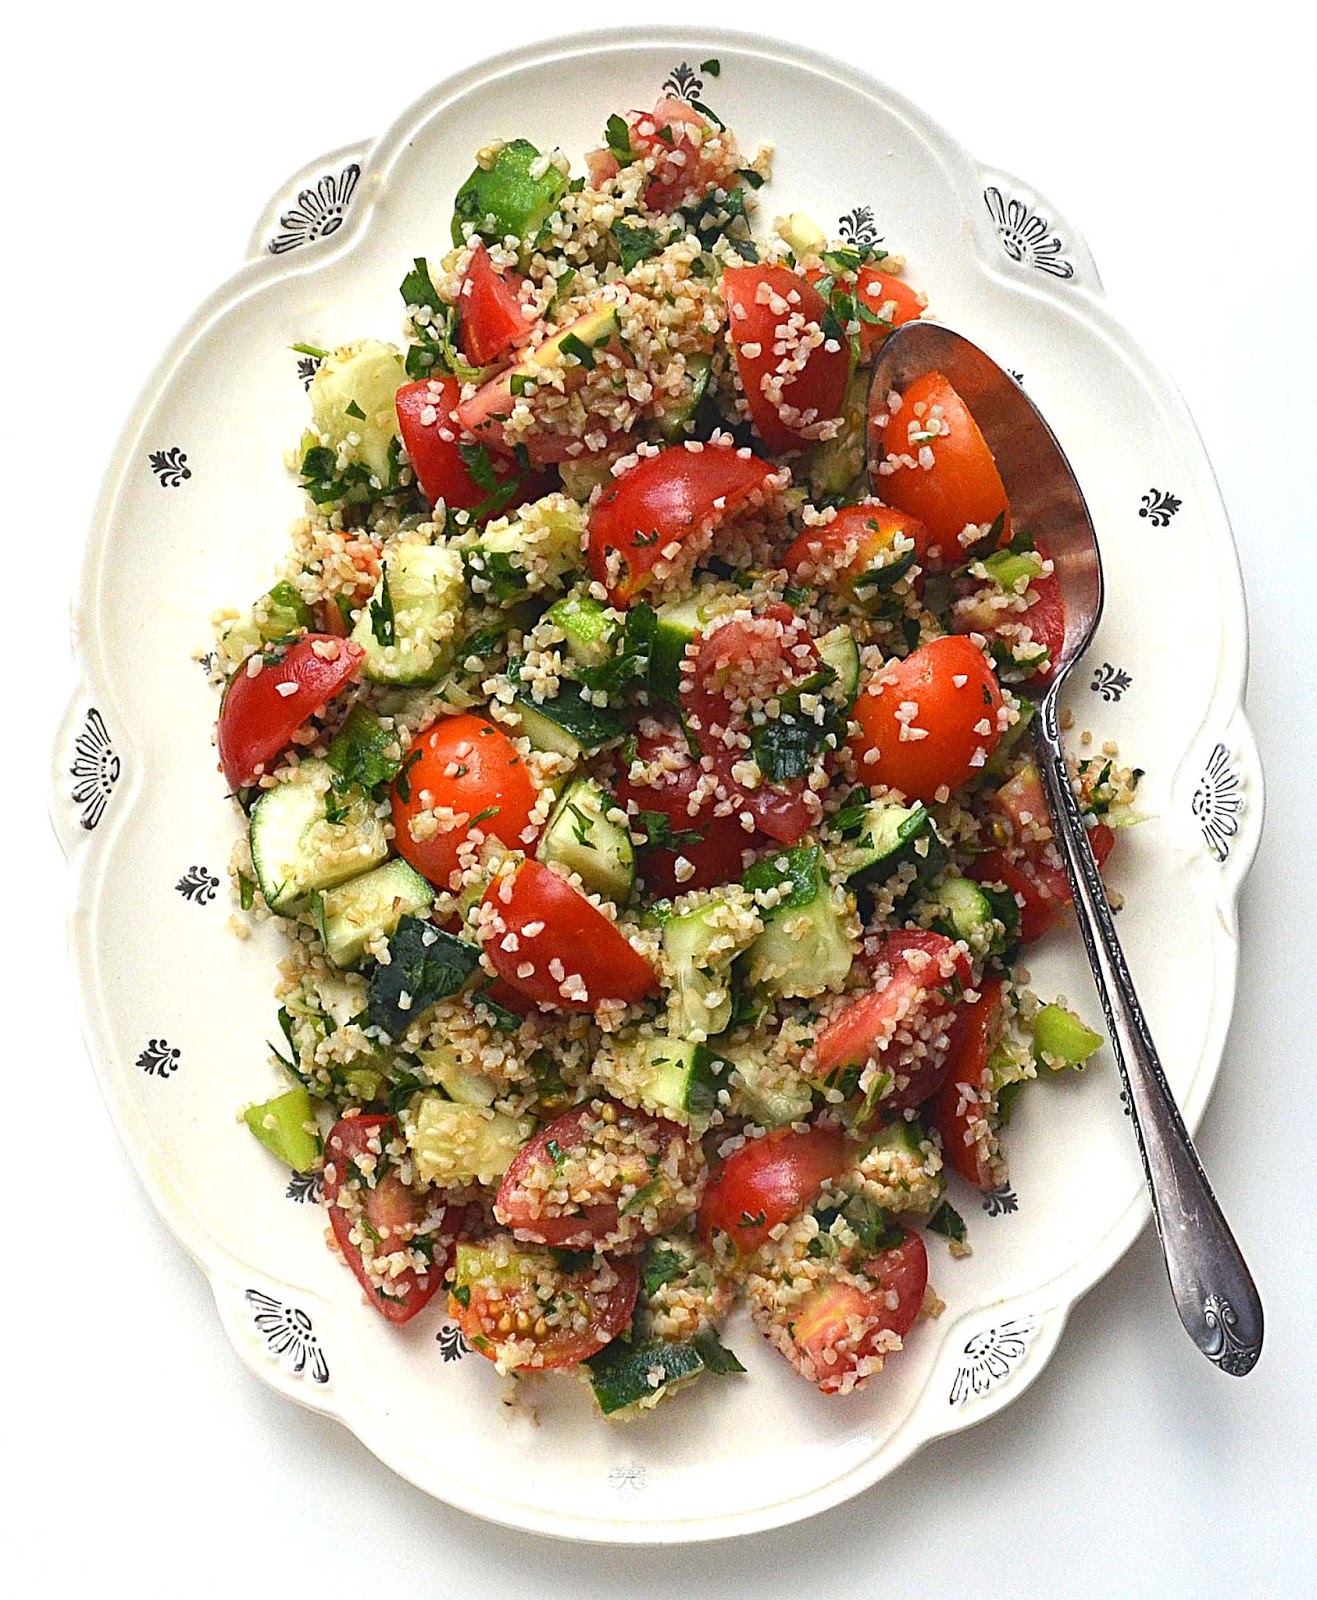 Sew French: Rustic Tabbouleh Salad